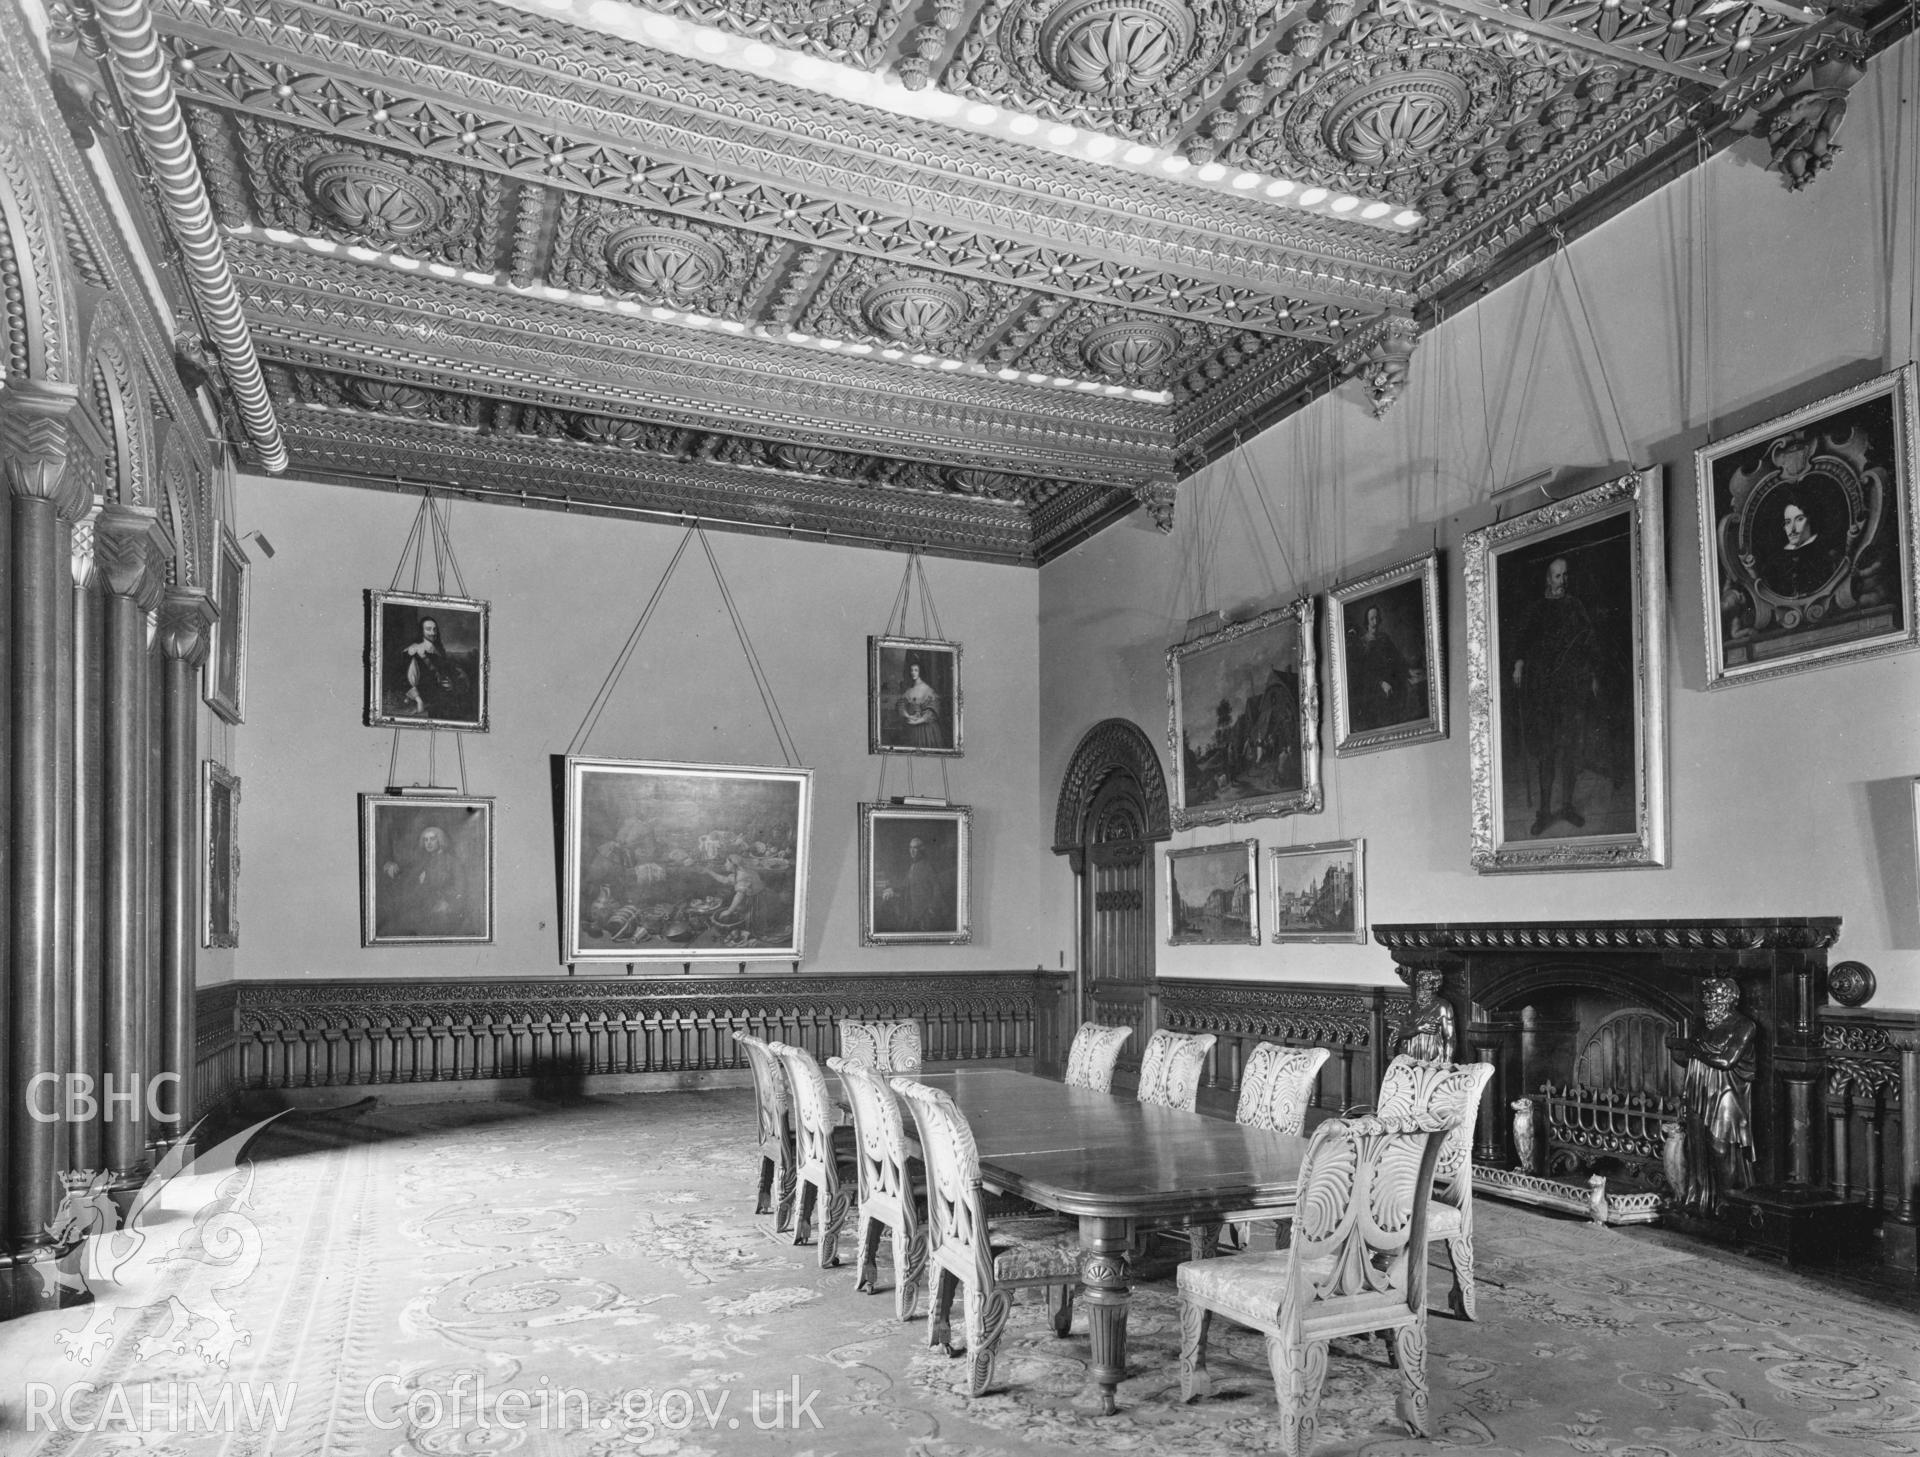 Digital  copy of a 1953 photo by A.F. Kersting showing the dining room at Penrhyn Castle by A F Kersting taken 1953. nprn 16687. site file CA Dom SH67.